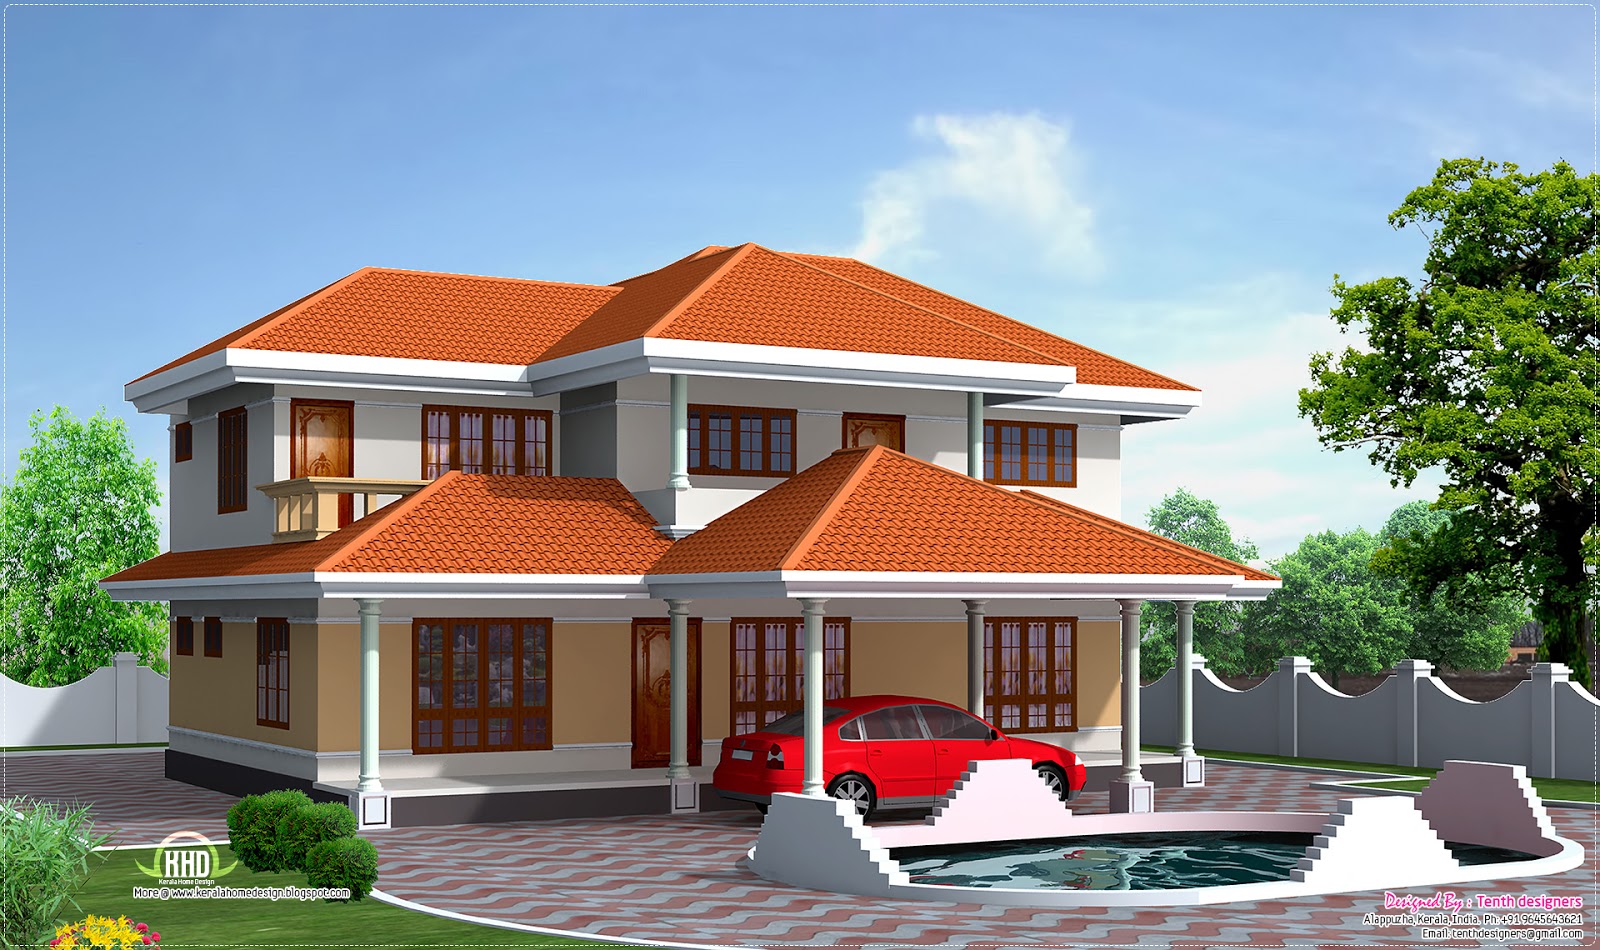  Four  bedroom  house  elevation  in 2500 sq feet Home  